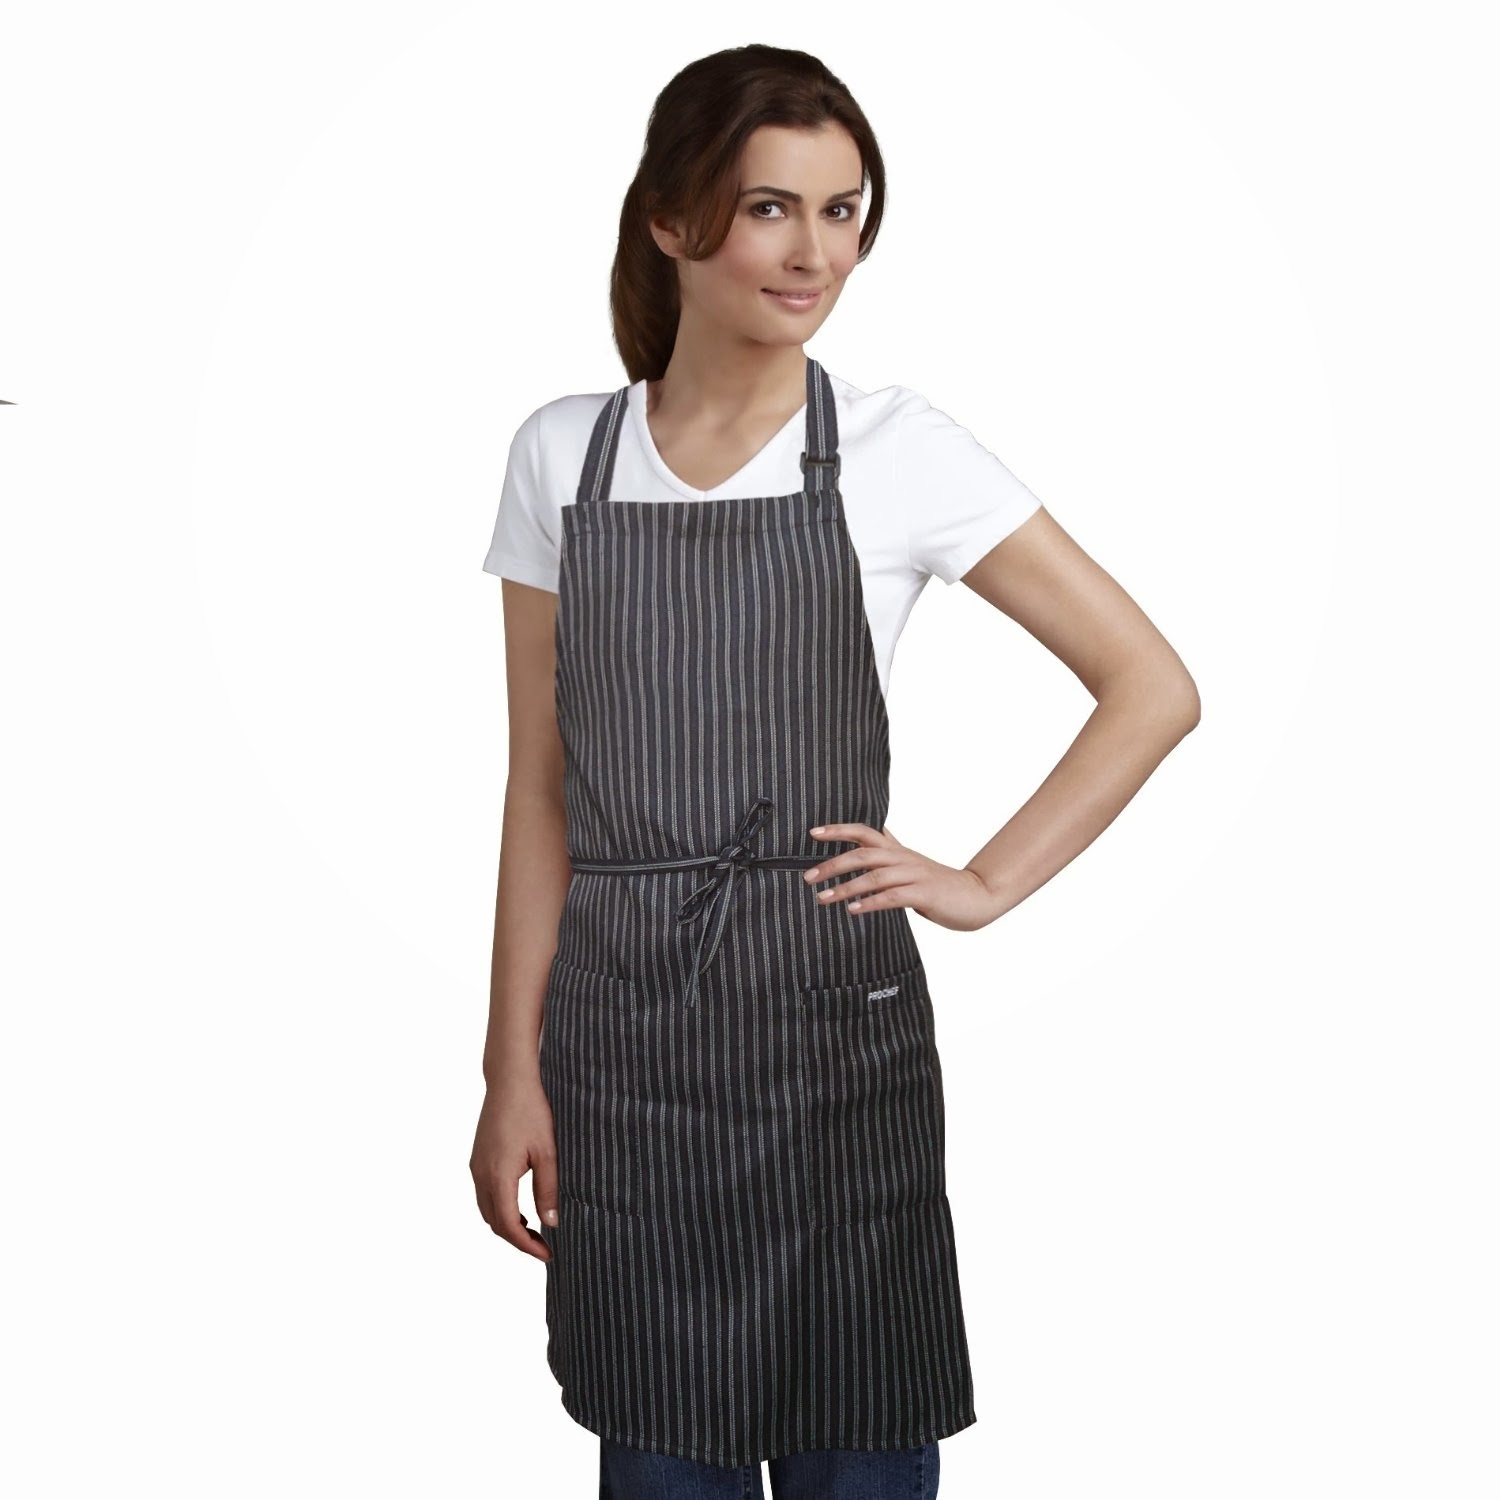 Aprons For Women With Pockets - Ideas on Foter